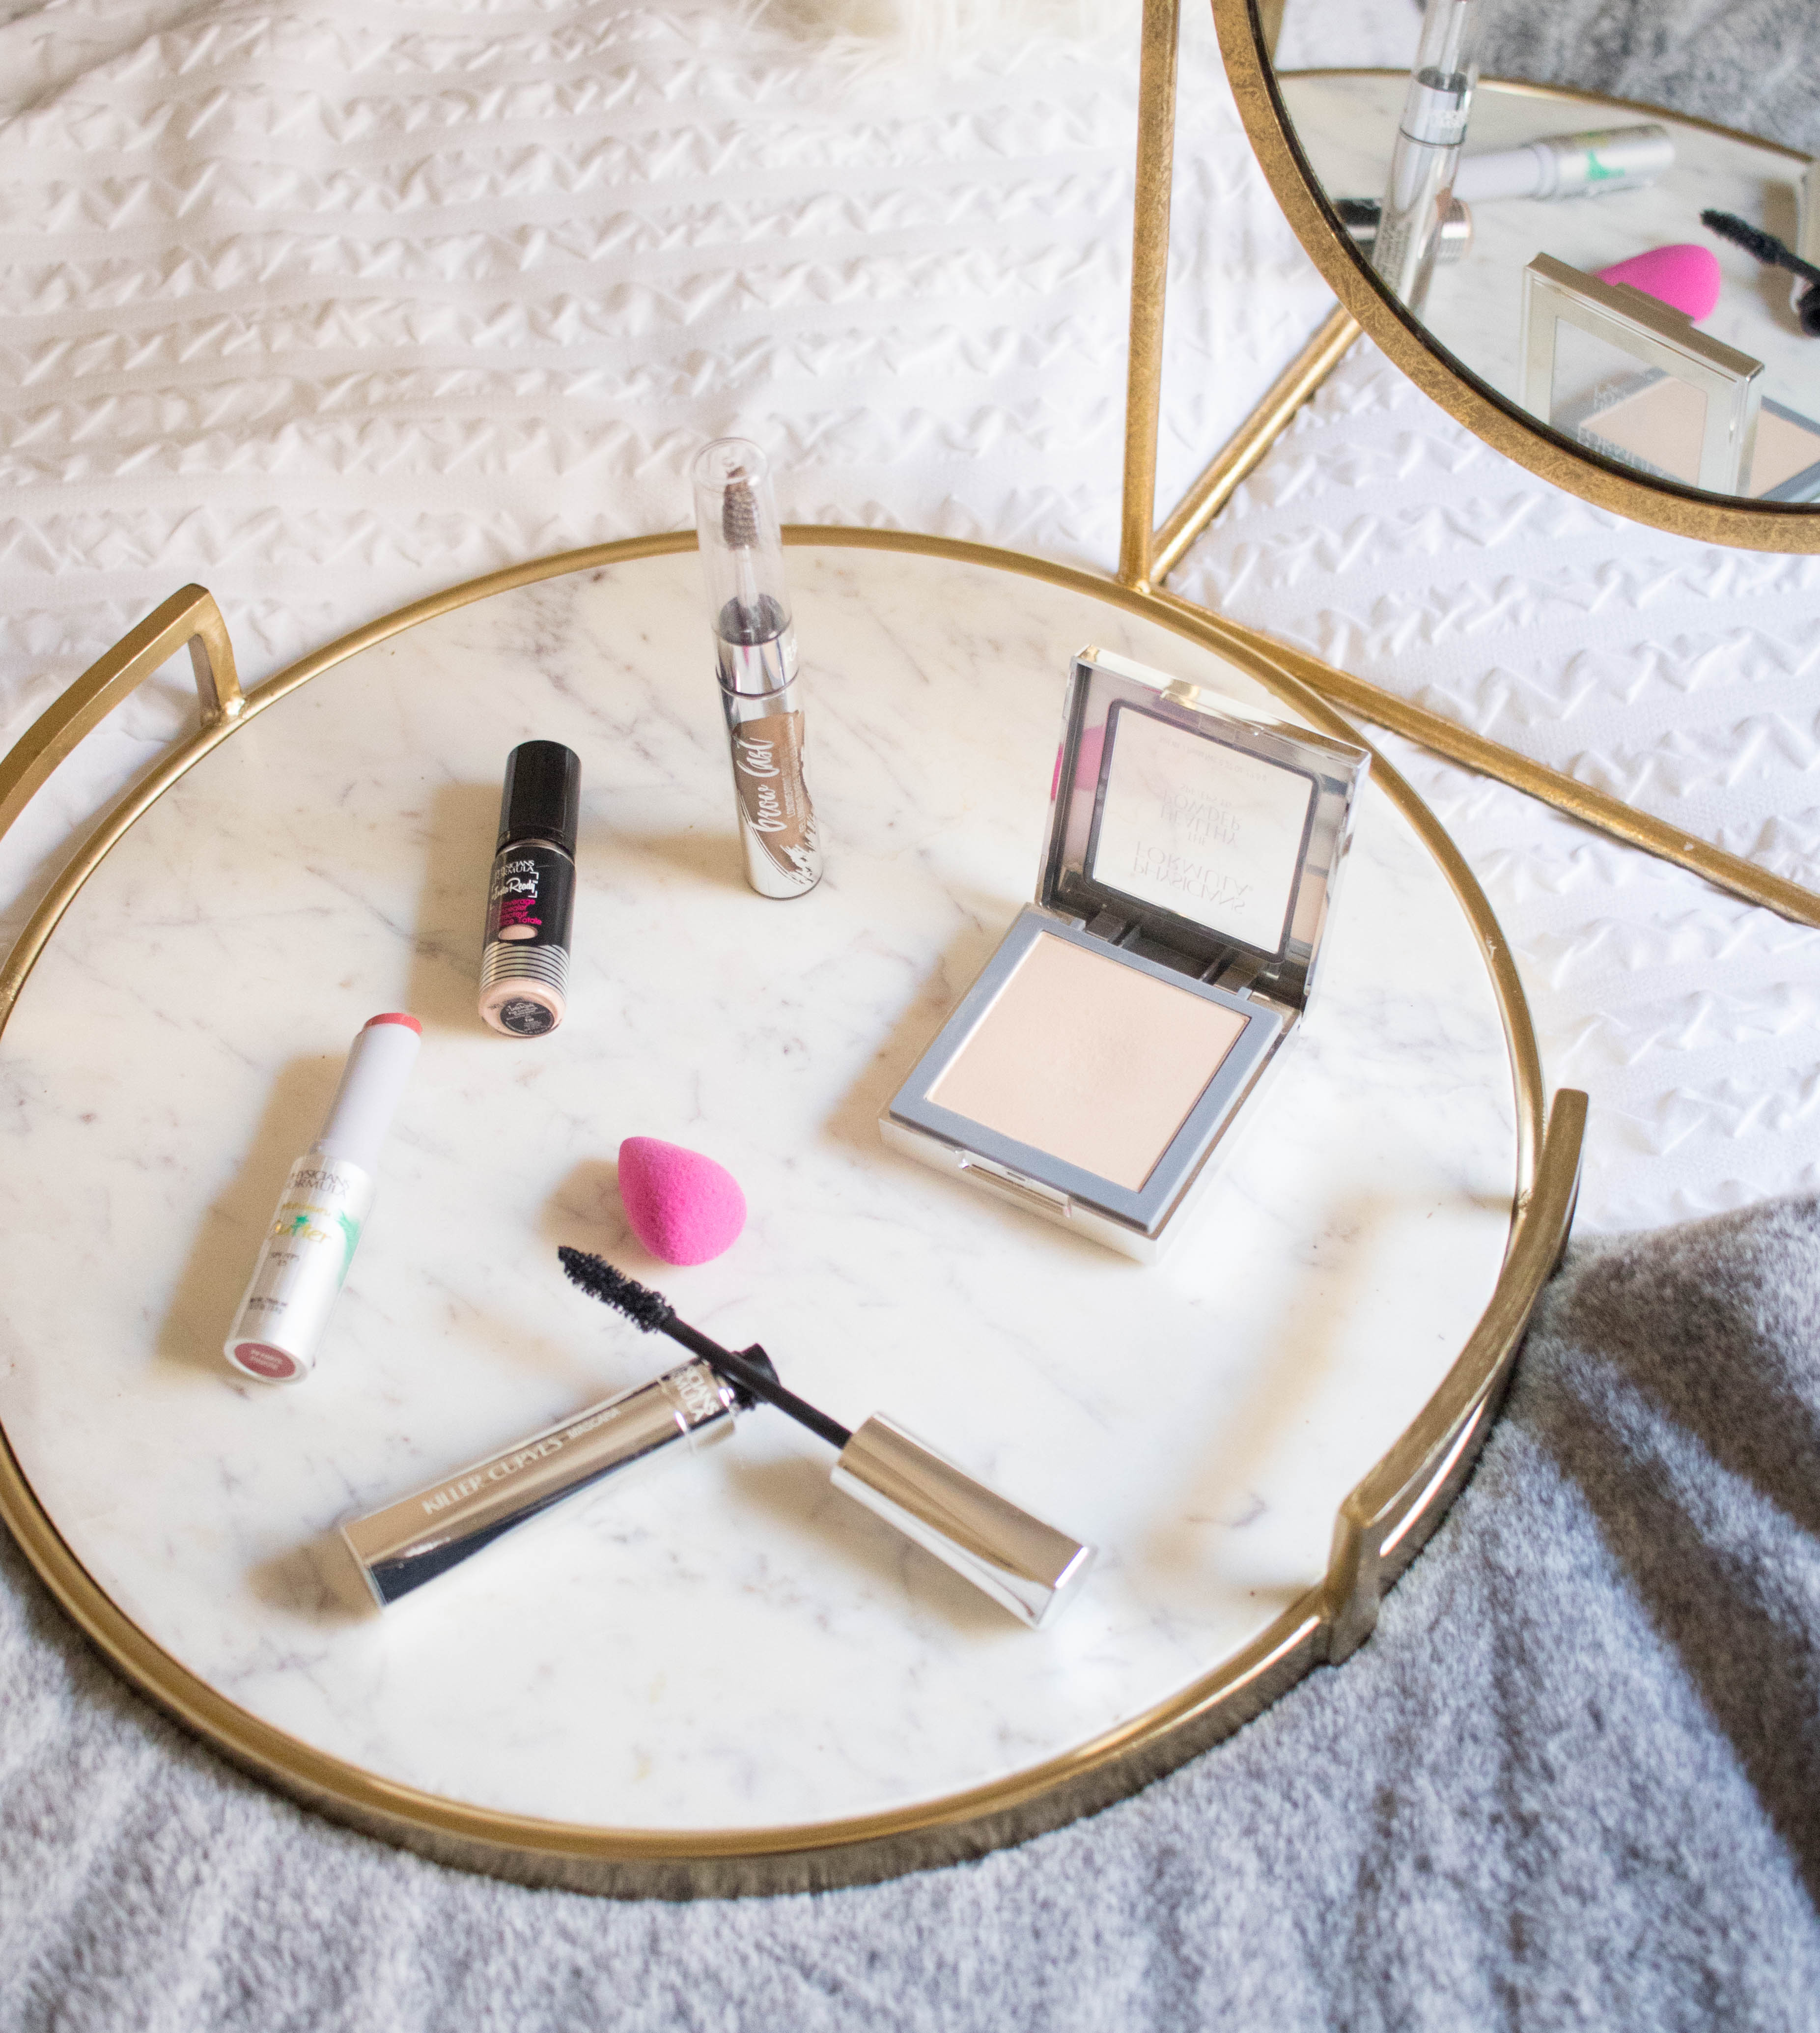 5 minute makeup routine using 5 products physicians formula #physiciansformula #thehealthypoweder #ad